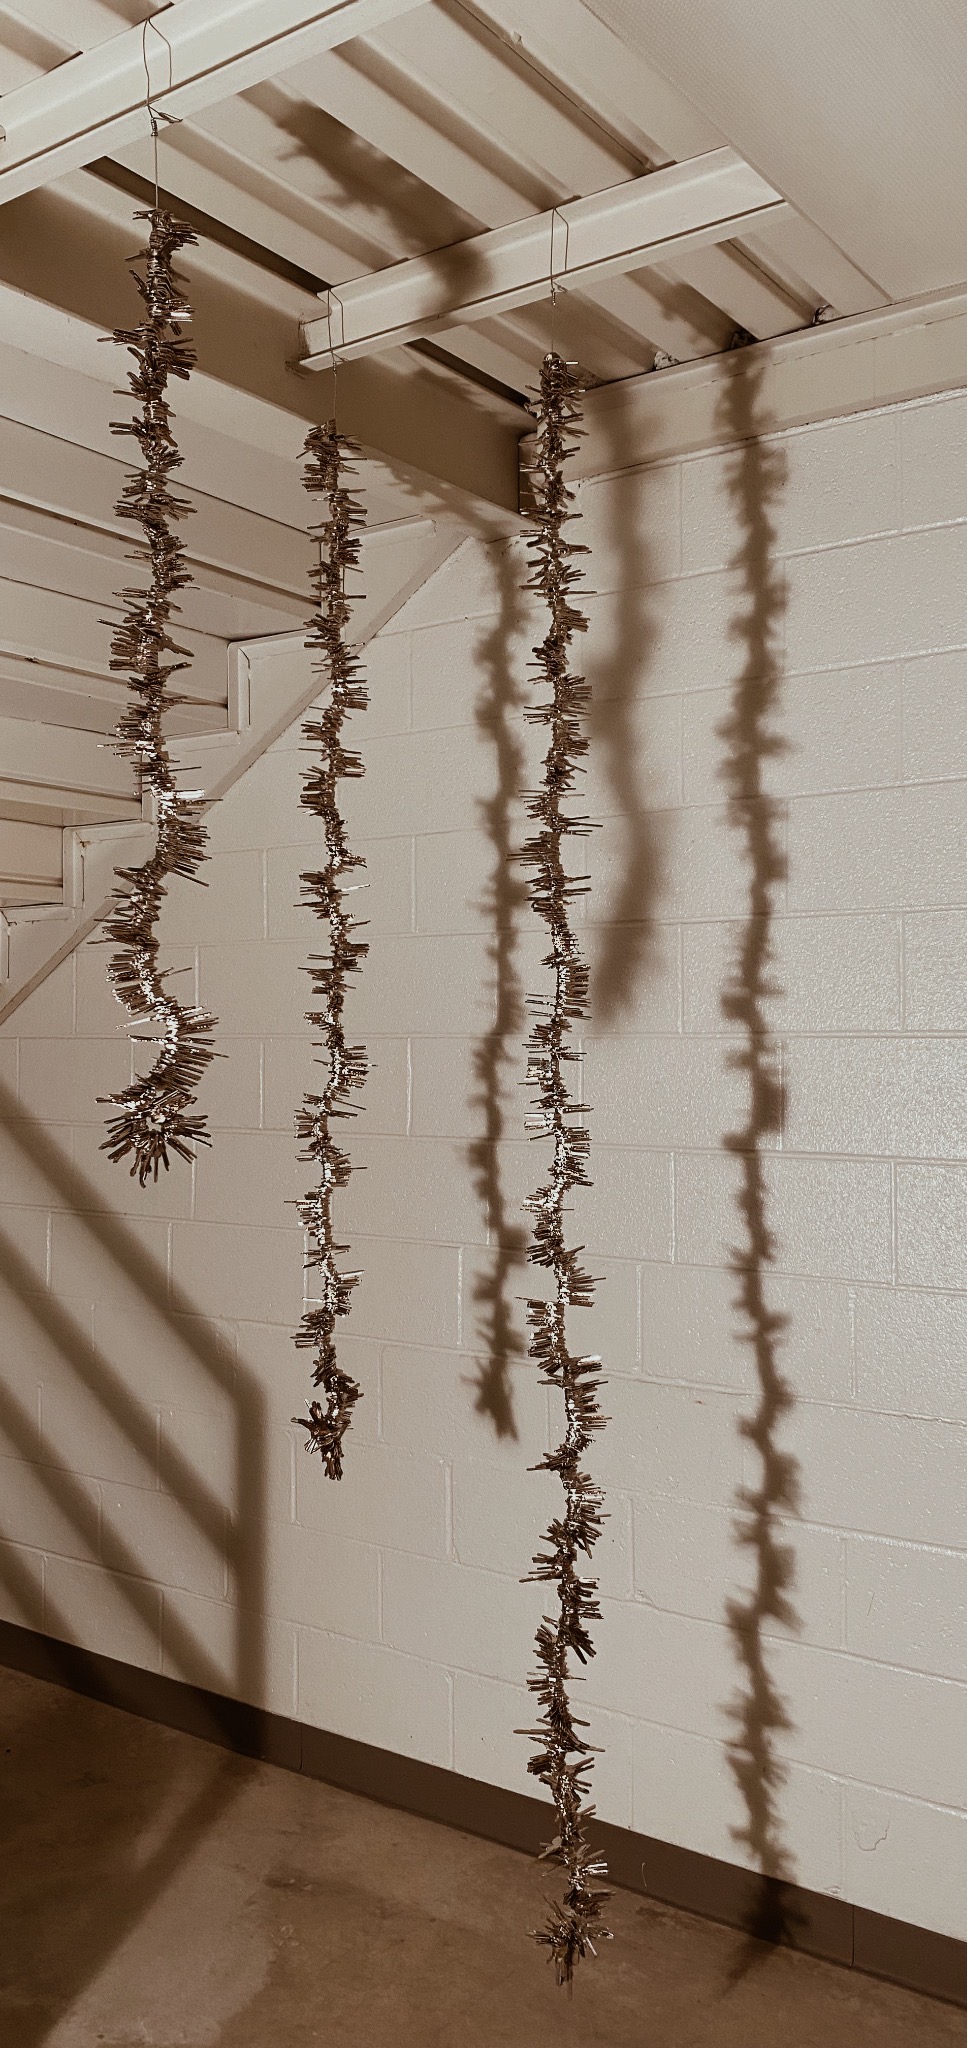 Three sets of wires with keys hung on them, hanging from a staircase.